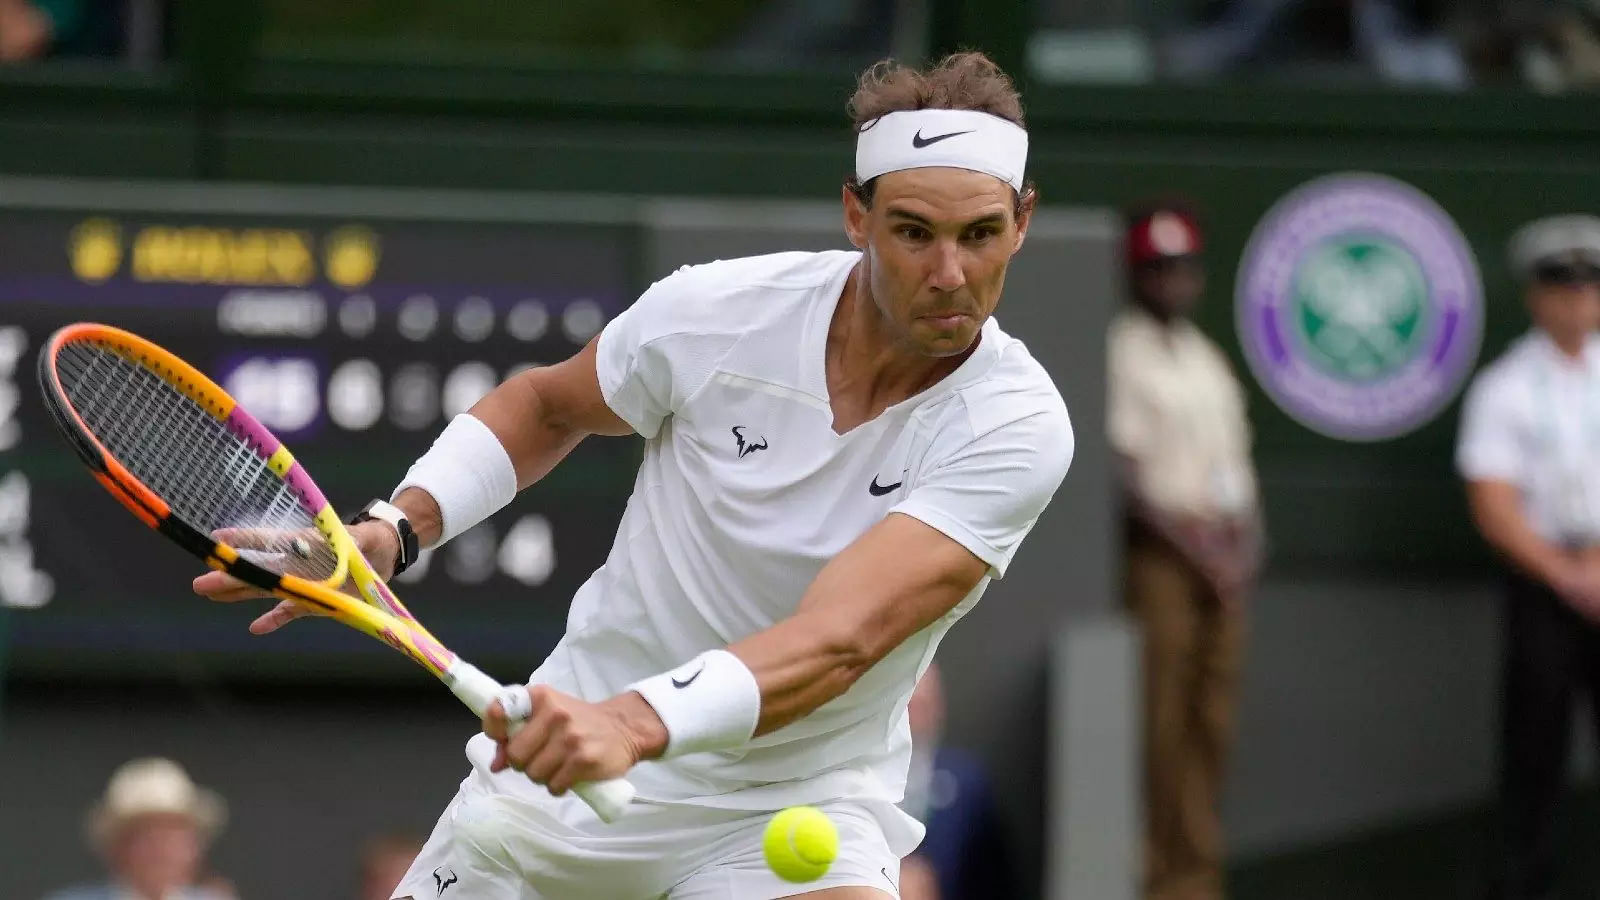 After abdominal injury at Wimbledon now Nadal may compete in Canadian Open